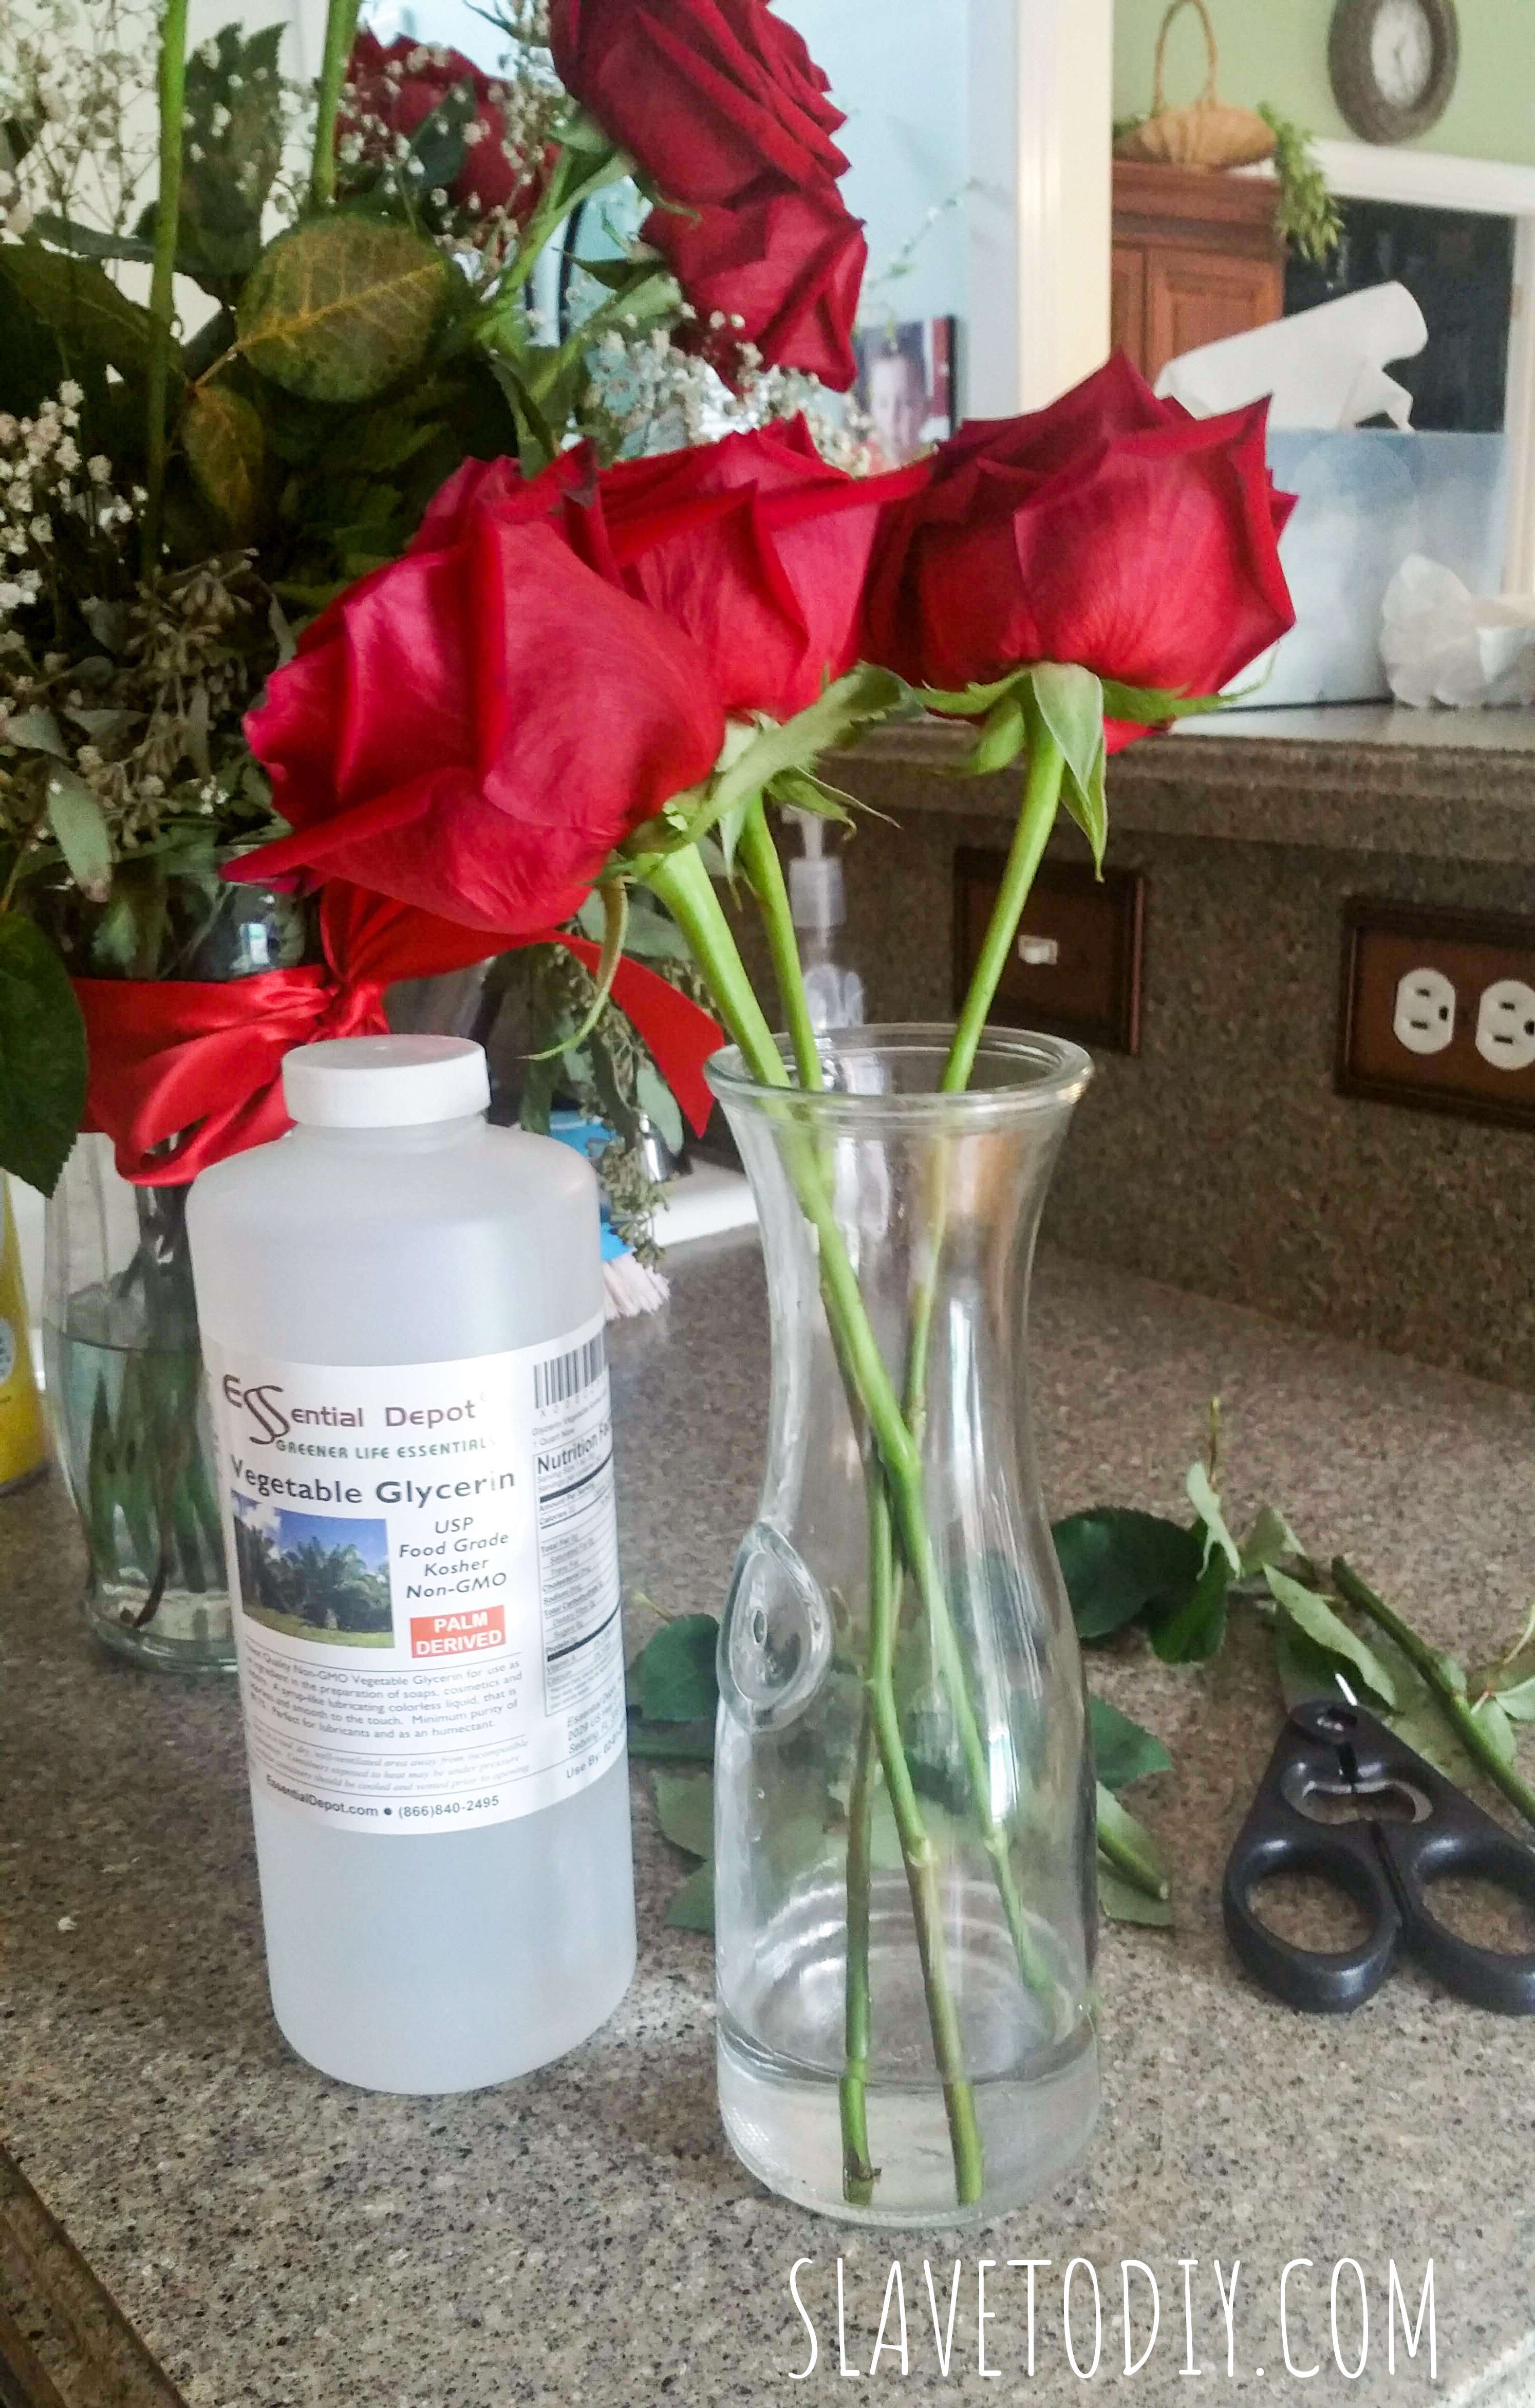 How to Preserve Roses